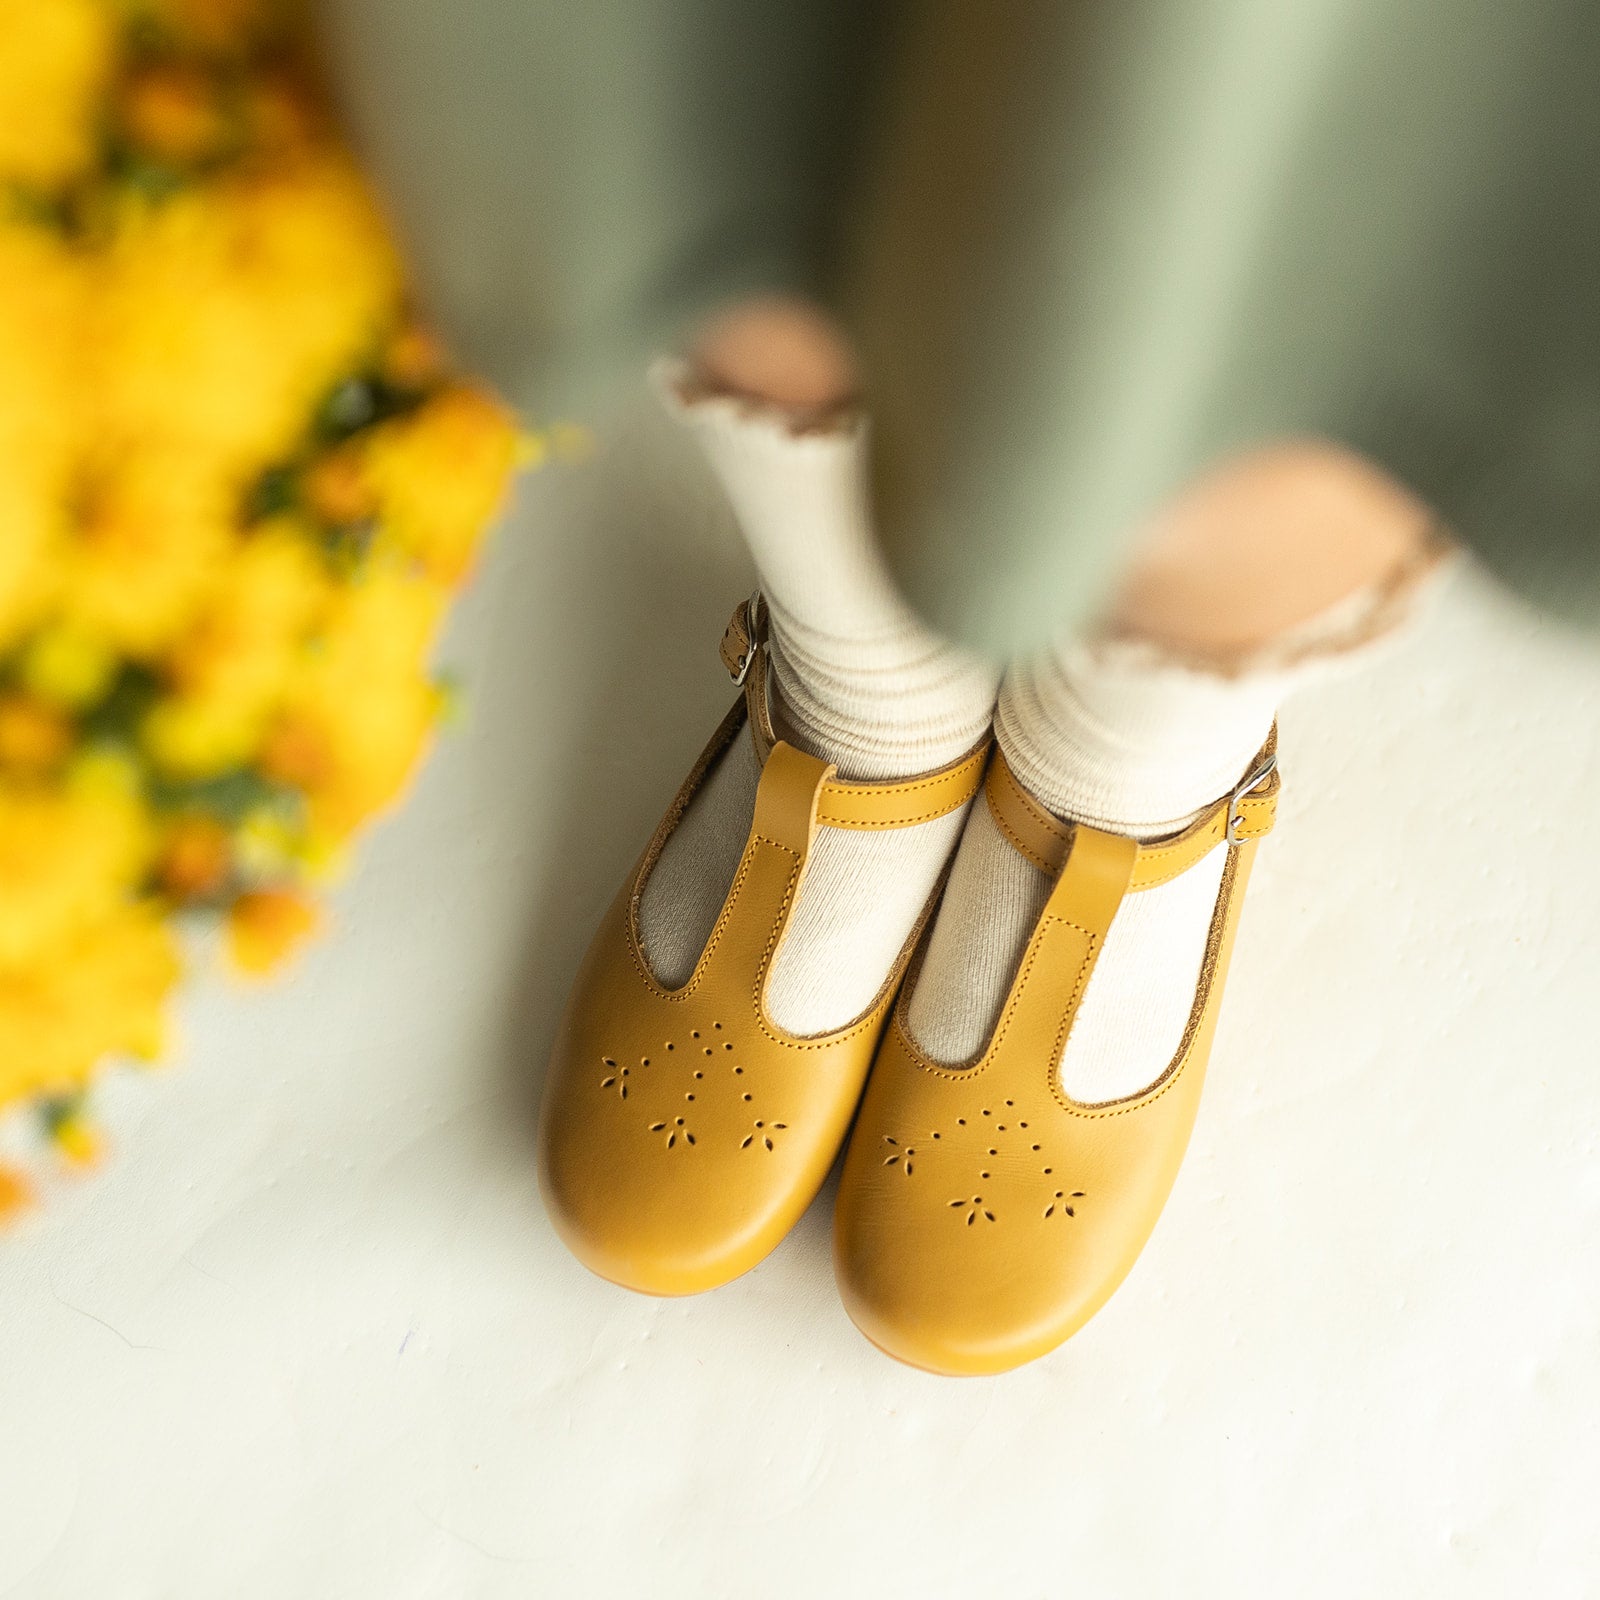 Adelisa & Co mustard yellow leather shoes for girls with floral detailing.